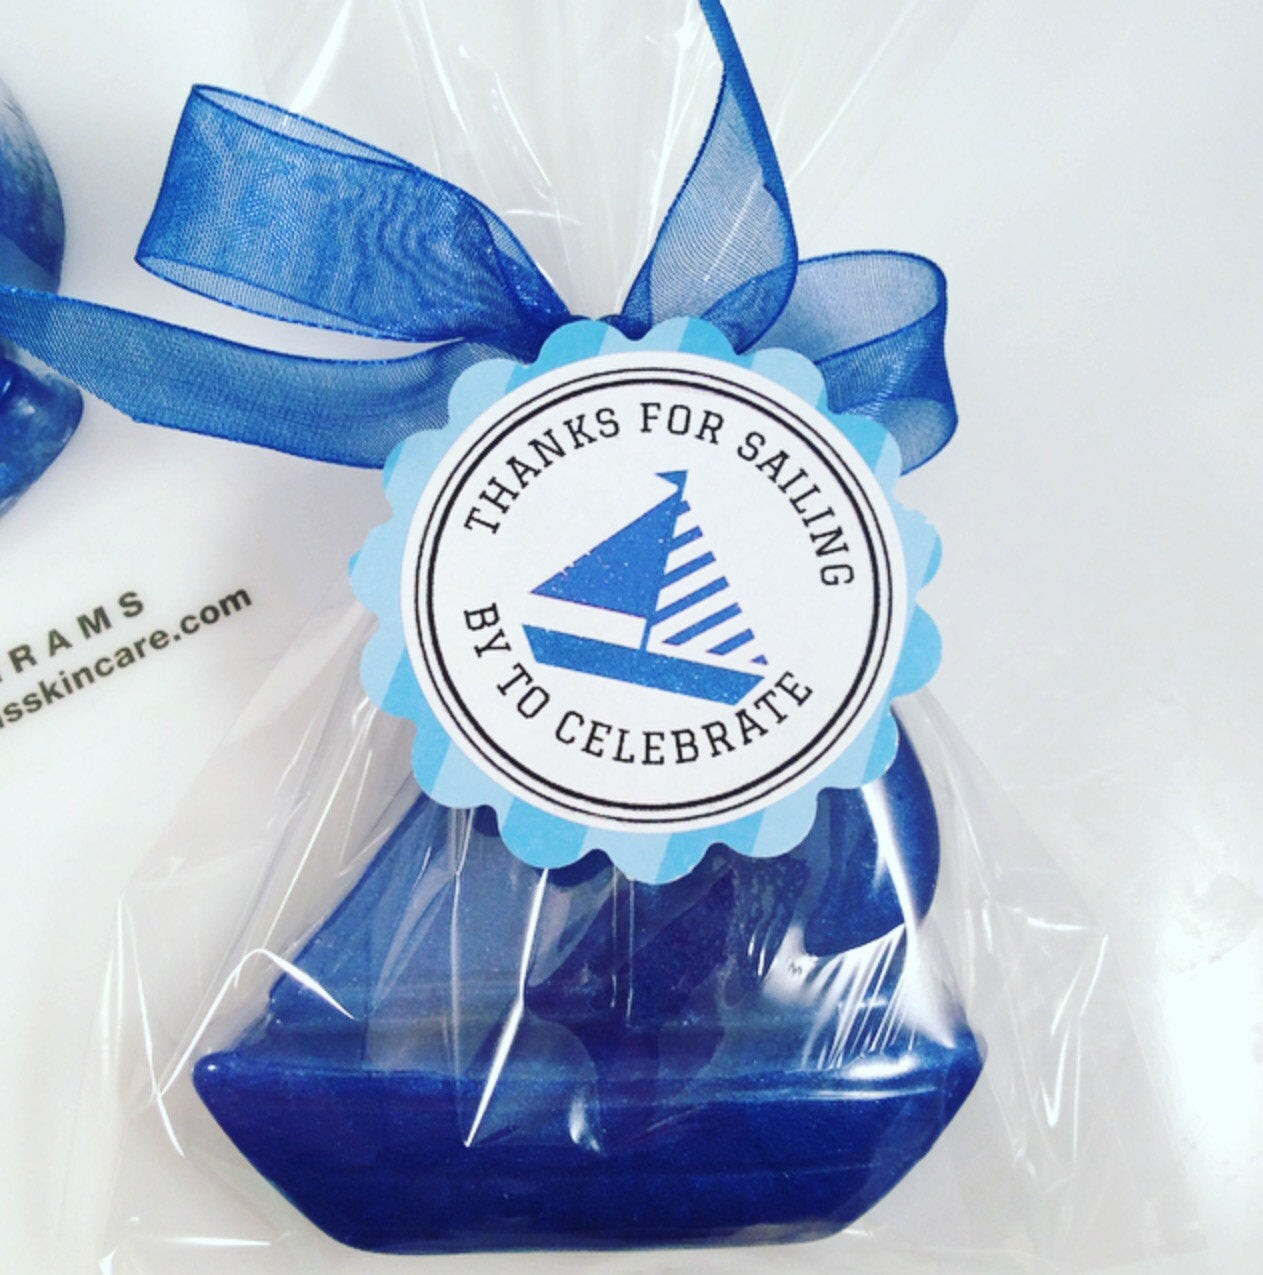 Nautical Themed Wedding Favors
 20 Sail Boat Soap Favors Nautical Themed Birthday Party